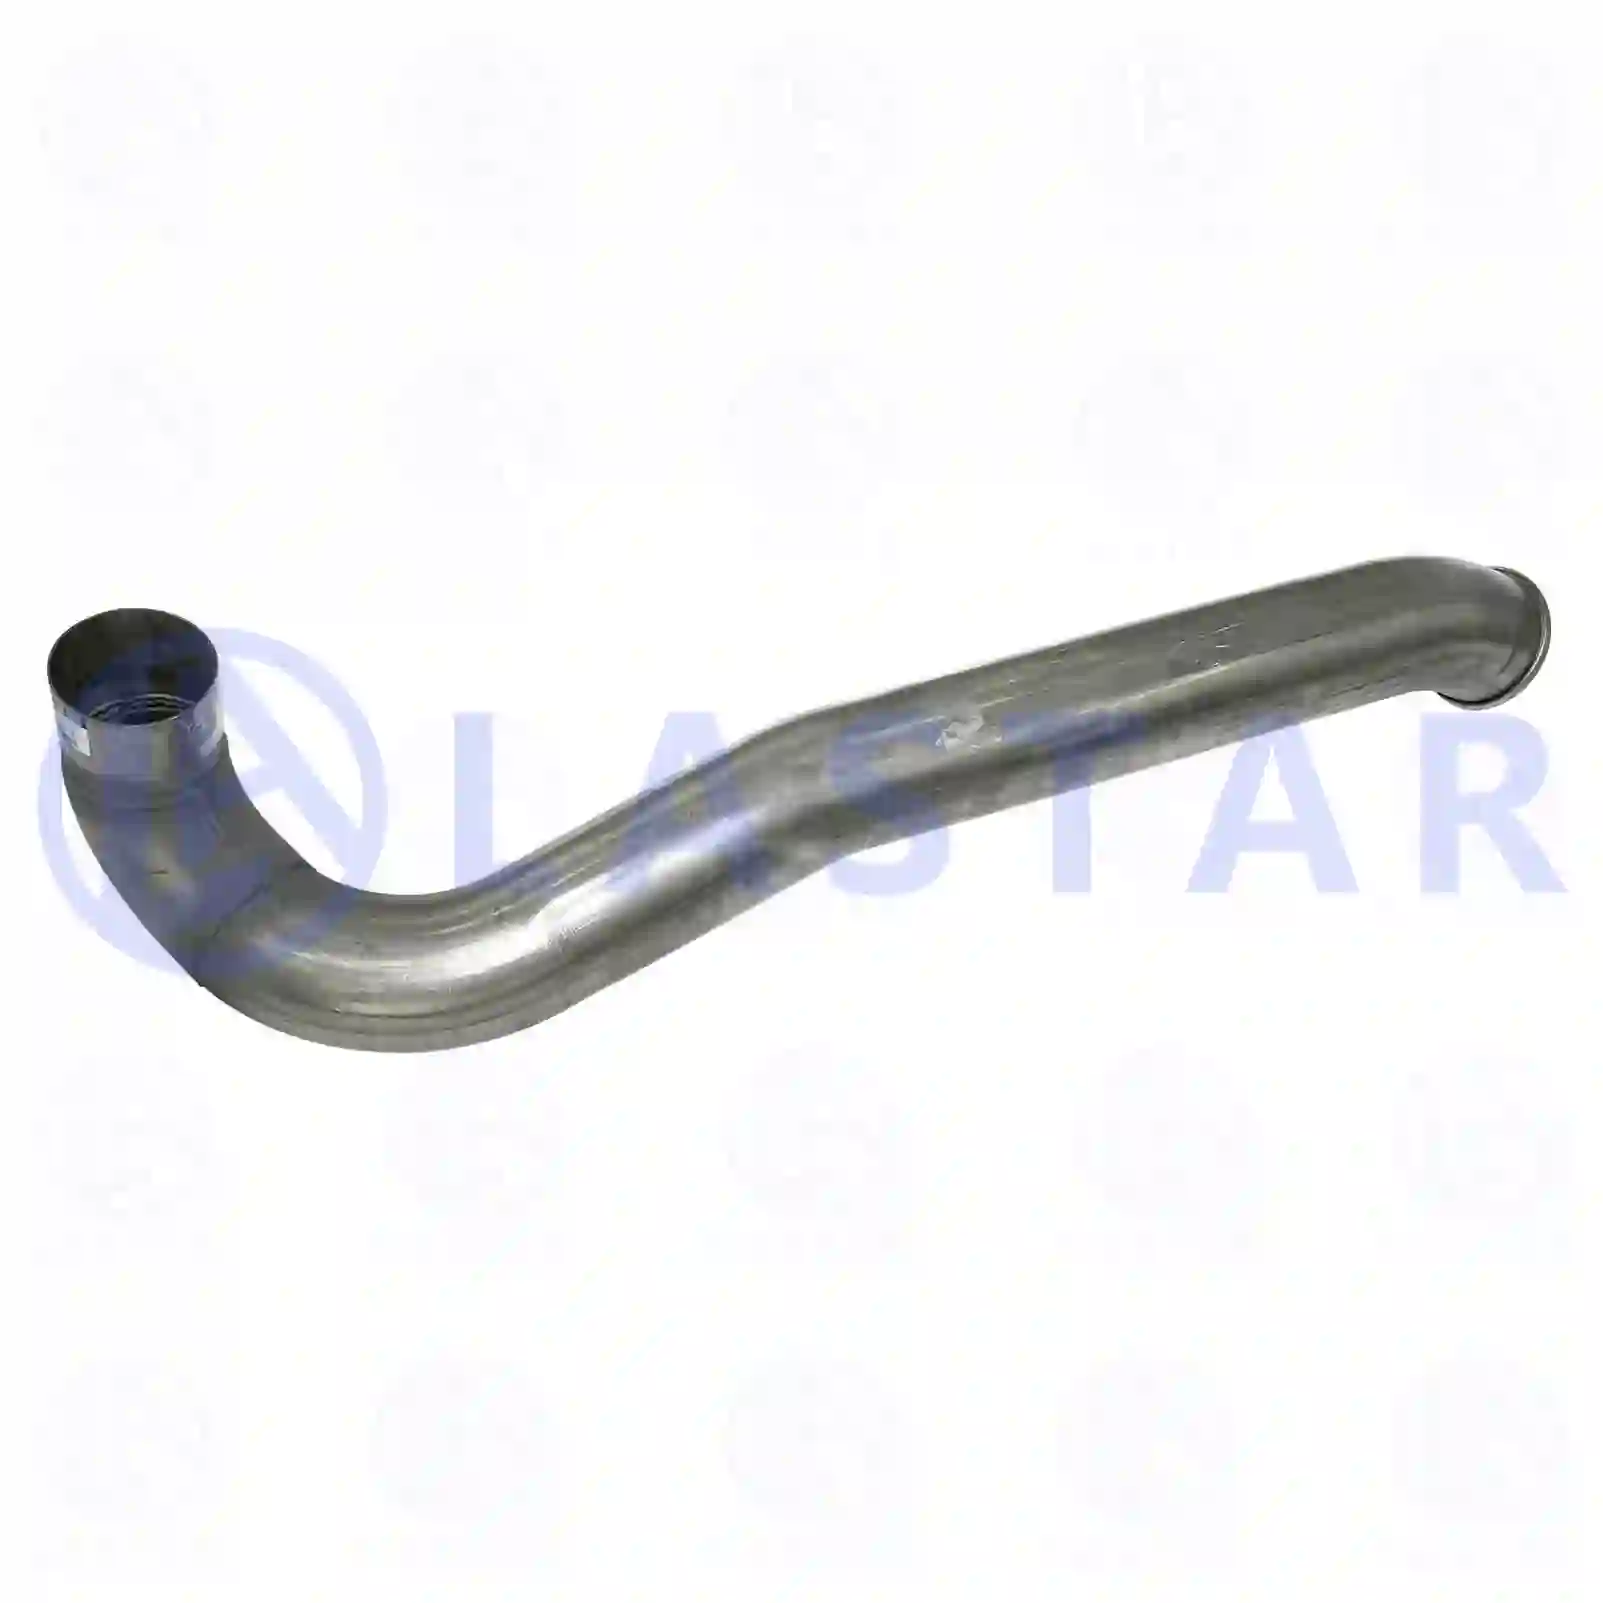 End pipe, 77707000, 1349199 ||  77707000 Lastar Spare Part | Truck Spare Parts, Auotomotive Spare Parts End pipe, 77707000, 1349199 ||  77707000 Lastar Spare Part | Truck Spare Parts, Auotomotive Spare Parts